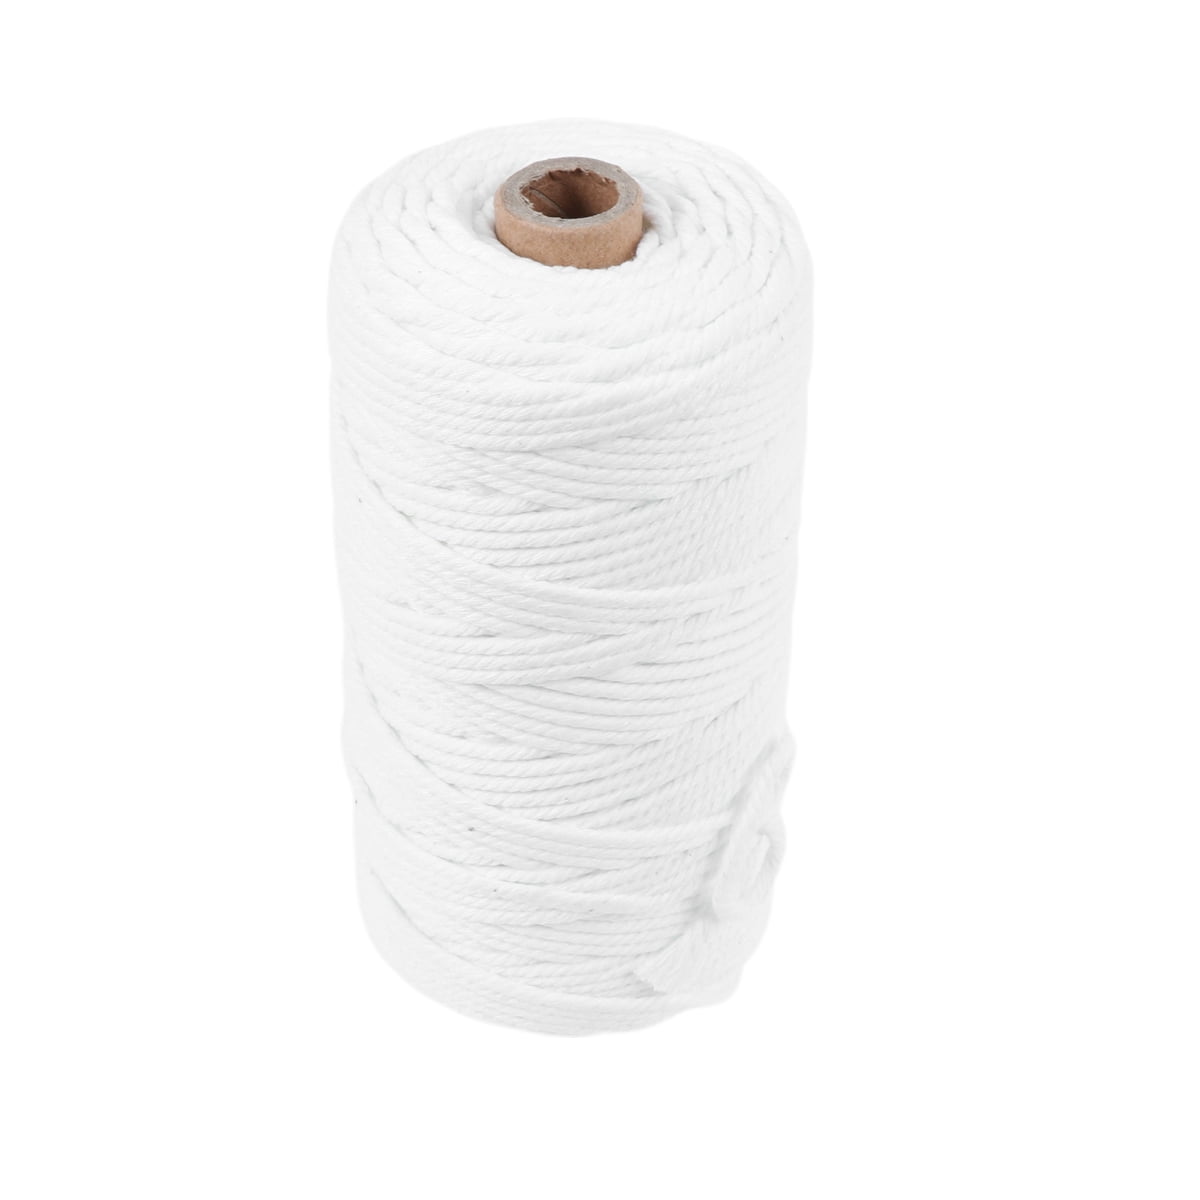 100m 3mm Woven Cord, Thick String, Ideal For Tapestry Hanging Tag